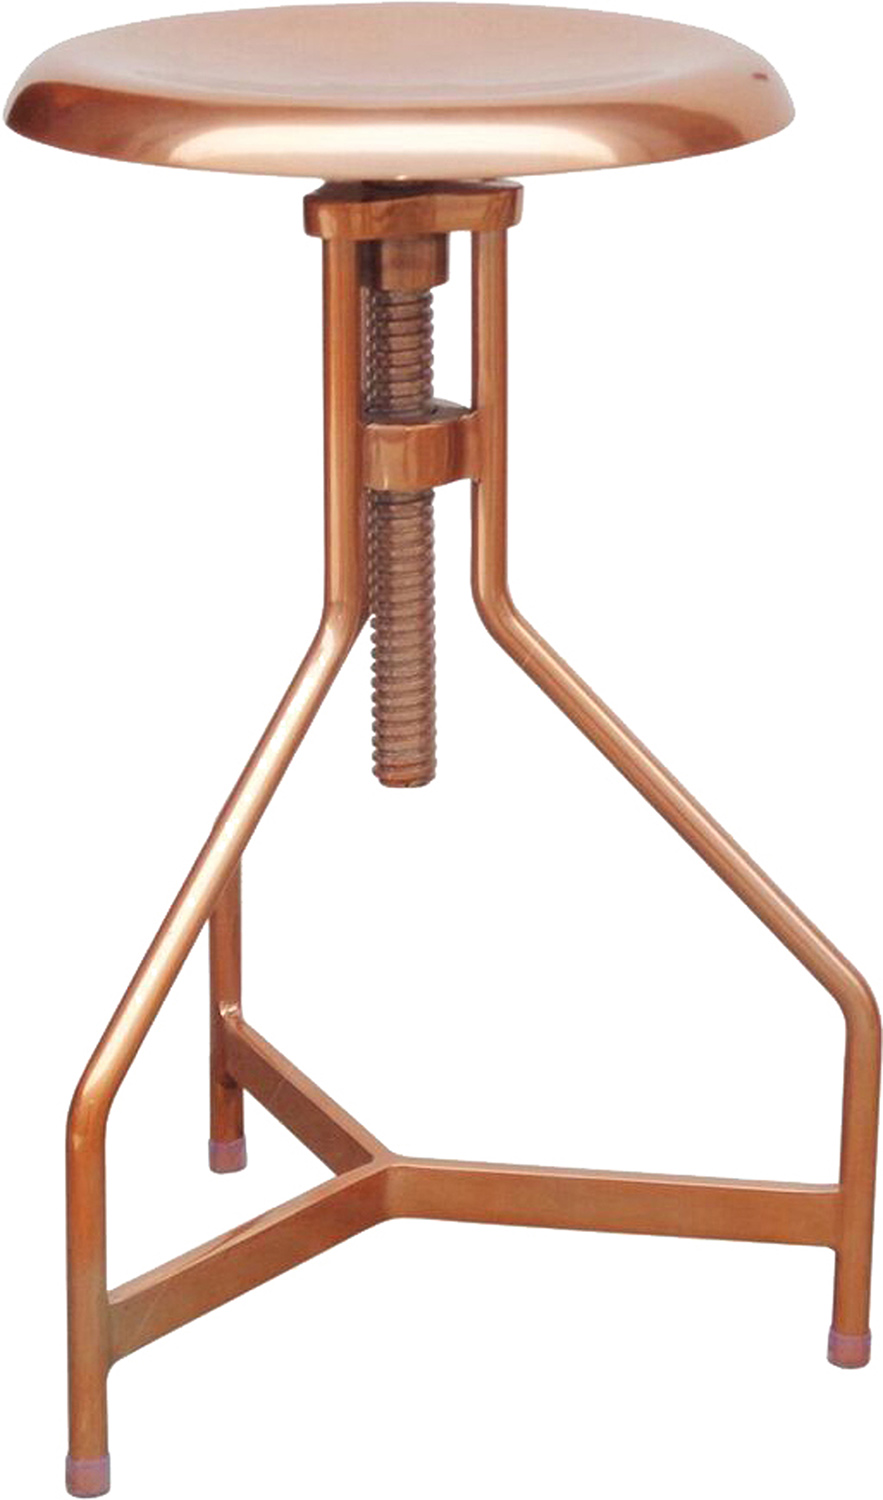 Ren-Wil Colter Stool - Copper